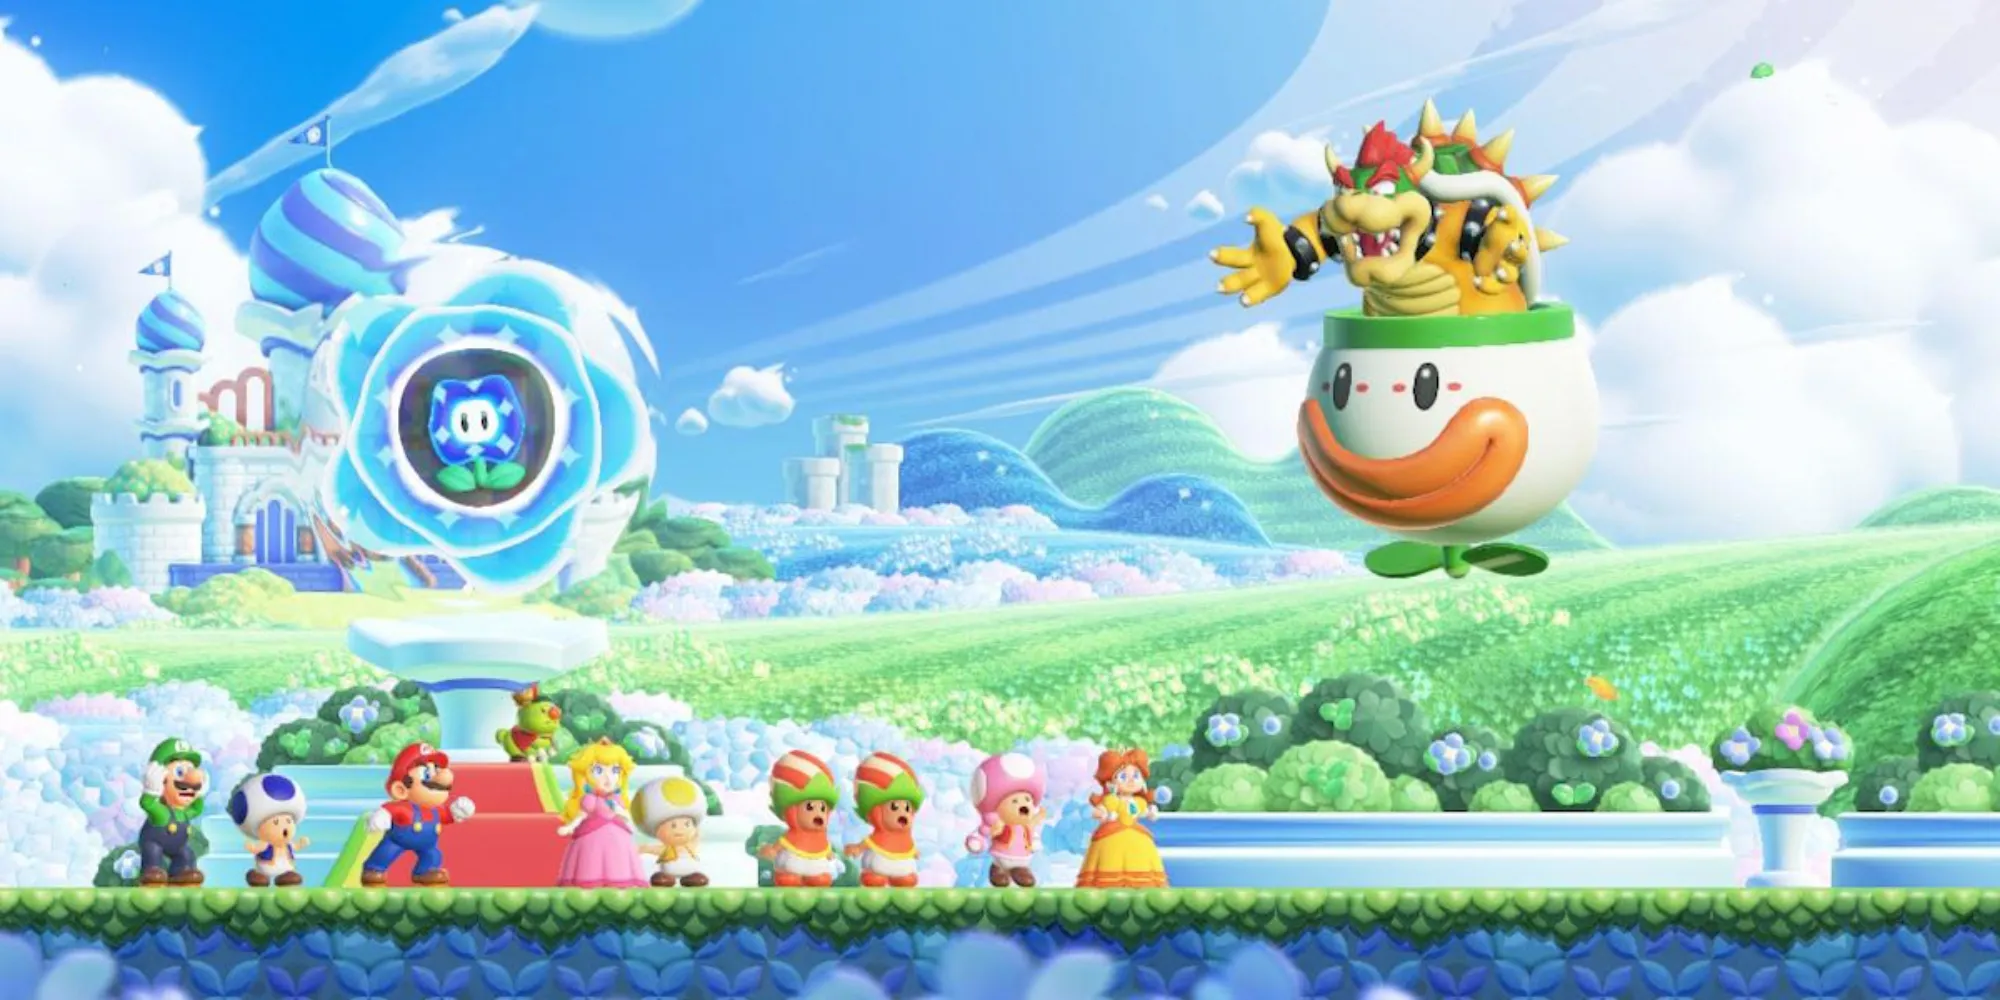 Bowser confronting Mario and friends over the Wonder Flower